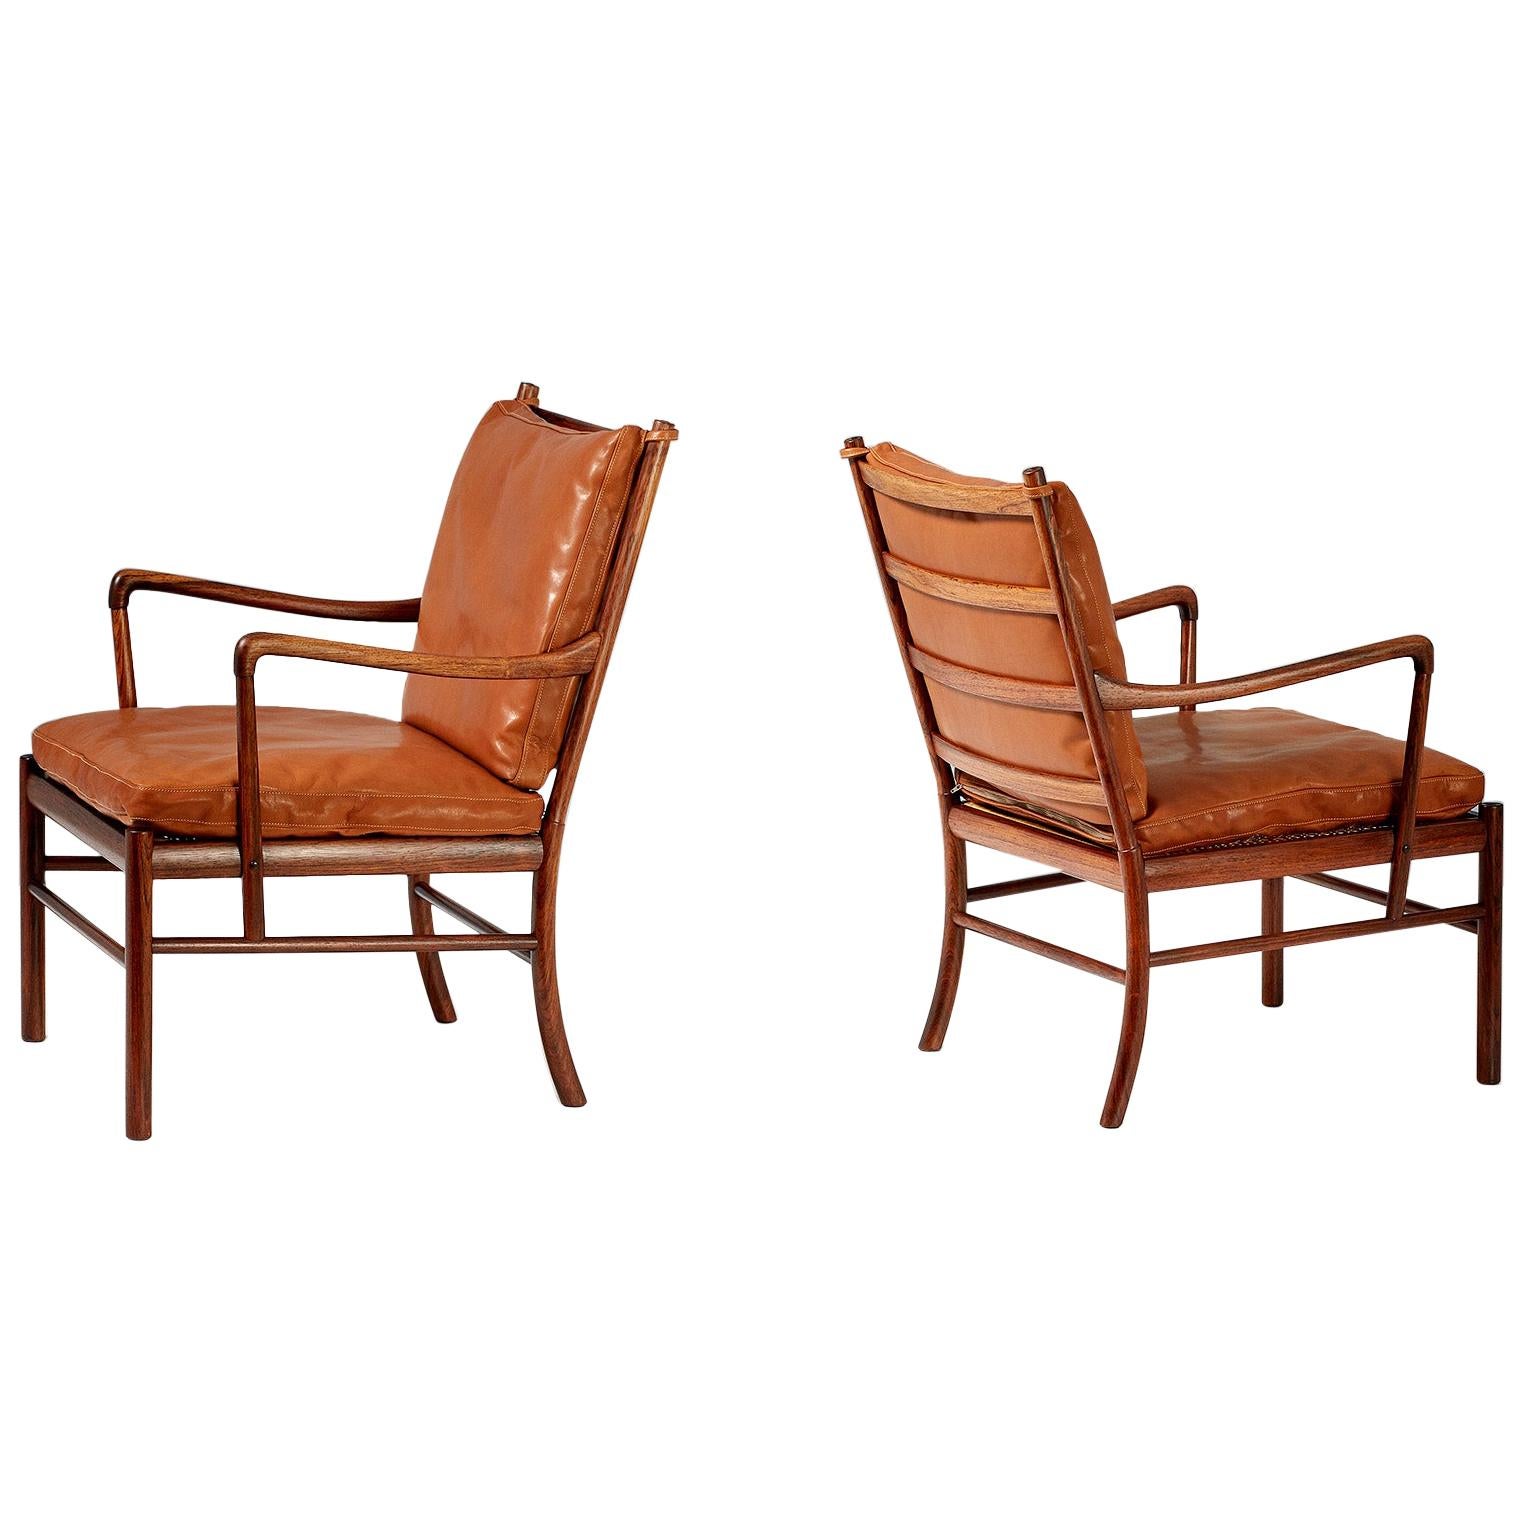 Ole Wanscher Pair of Rosewood Colonial Chairs, 1950s